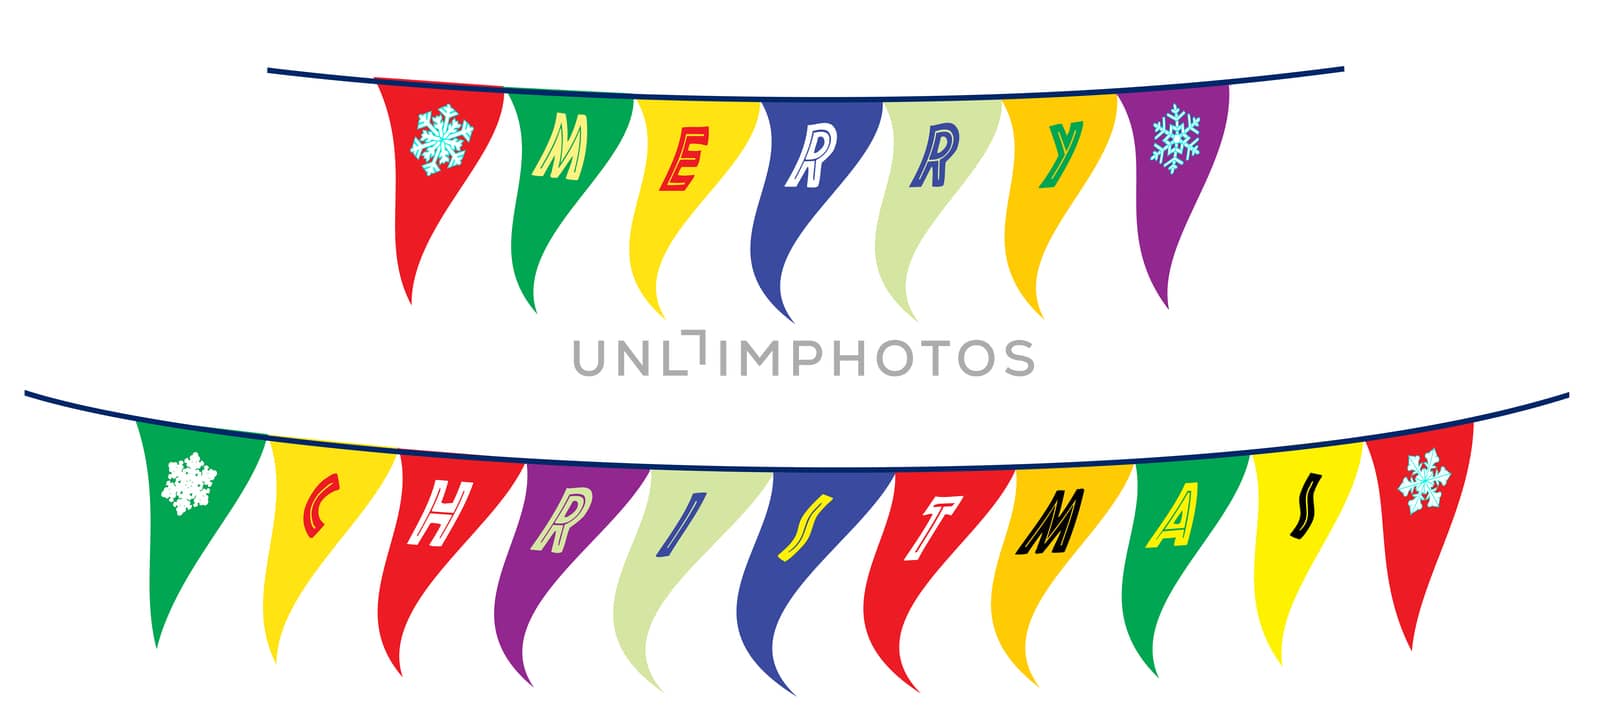 The text Merry Christmas as a line of fluttering bunting on a white background